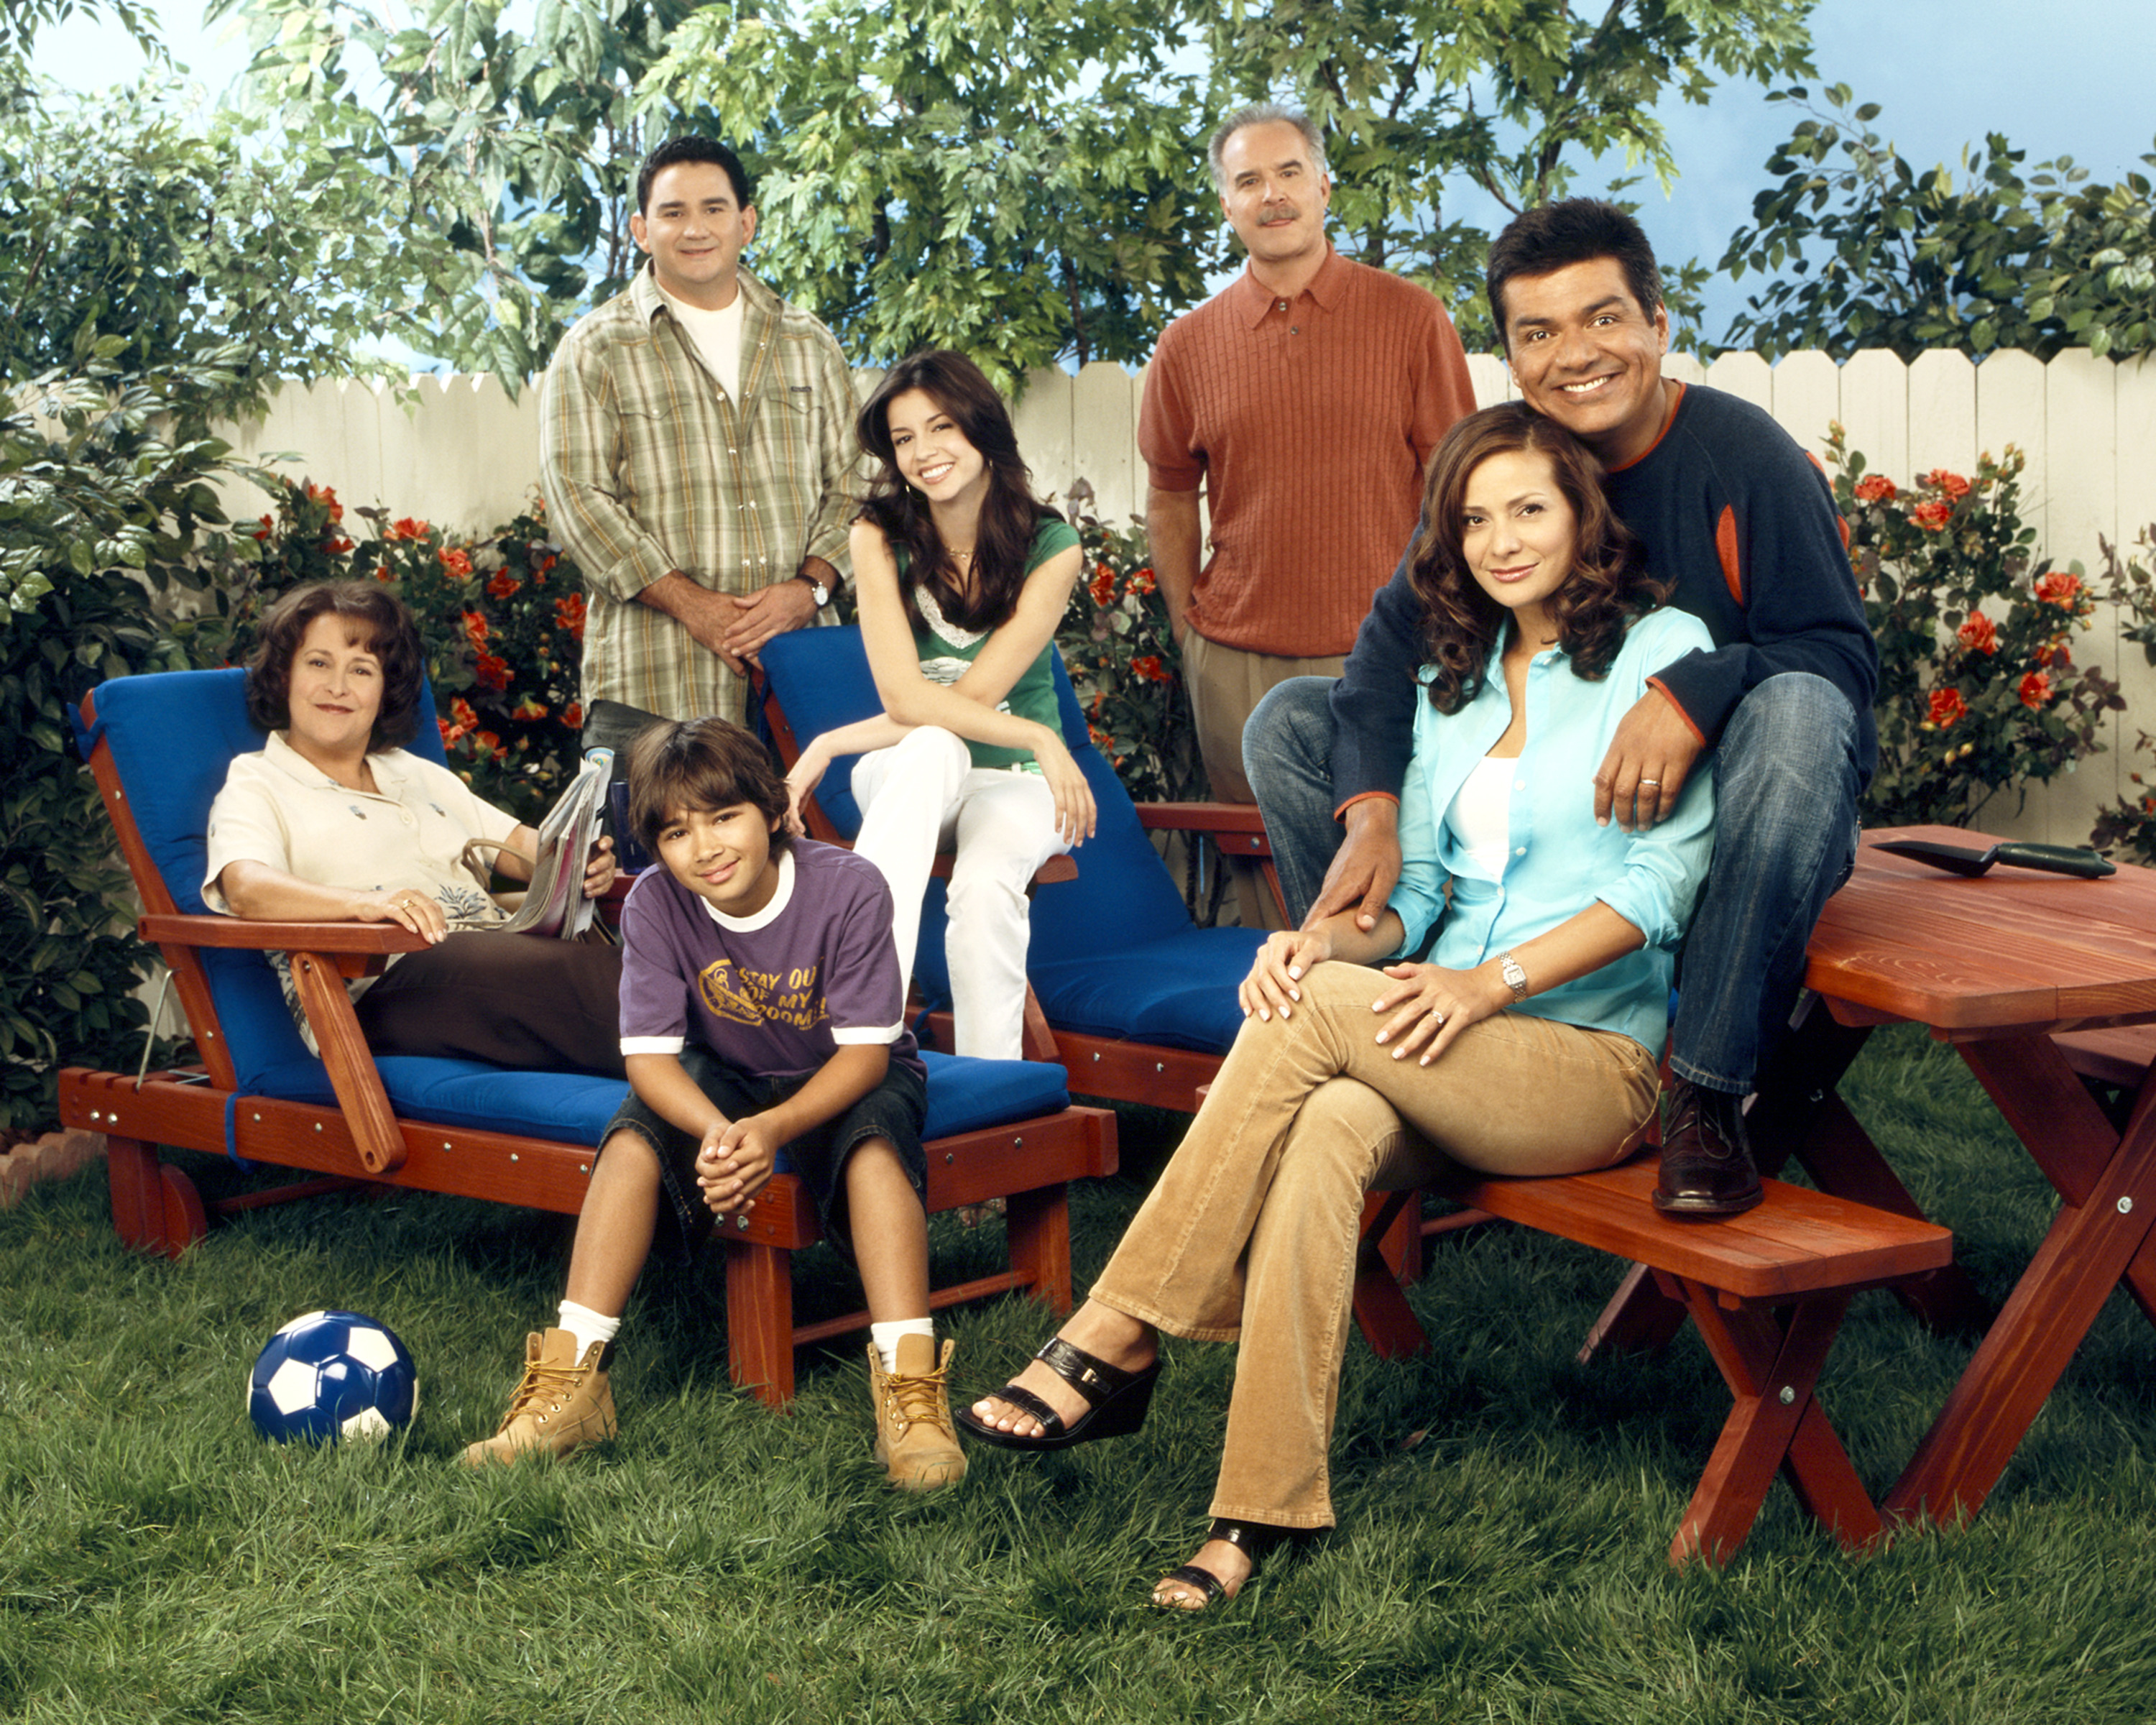 How The George Lopez Show Brilliantly Captured Family Life HuffPost Entertainment